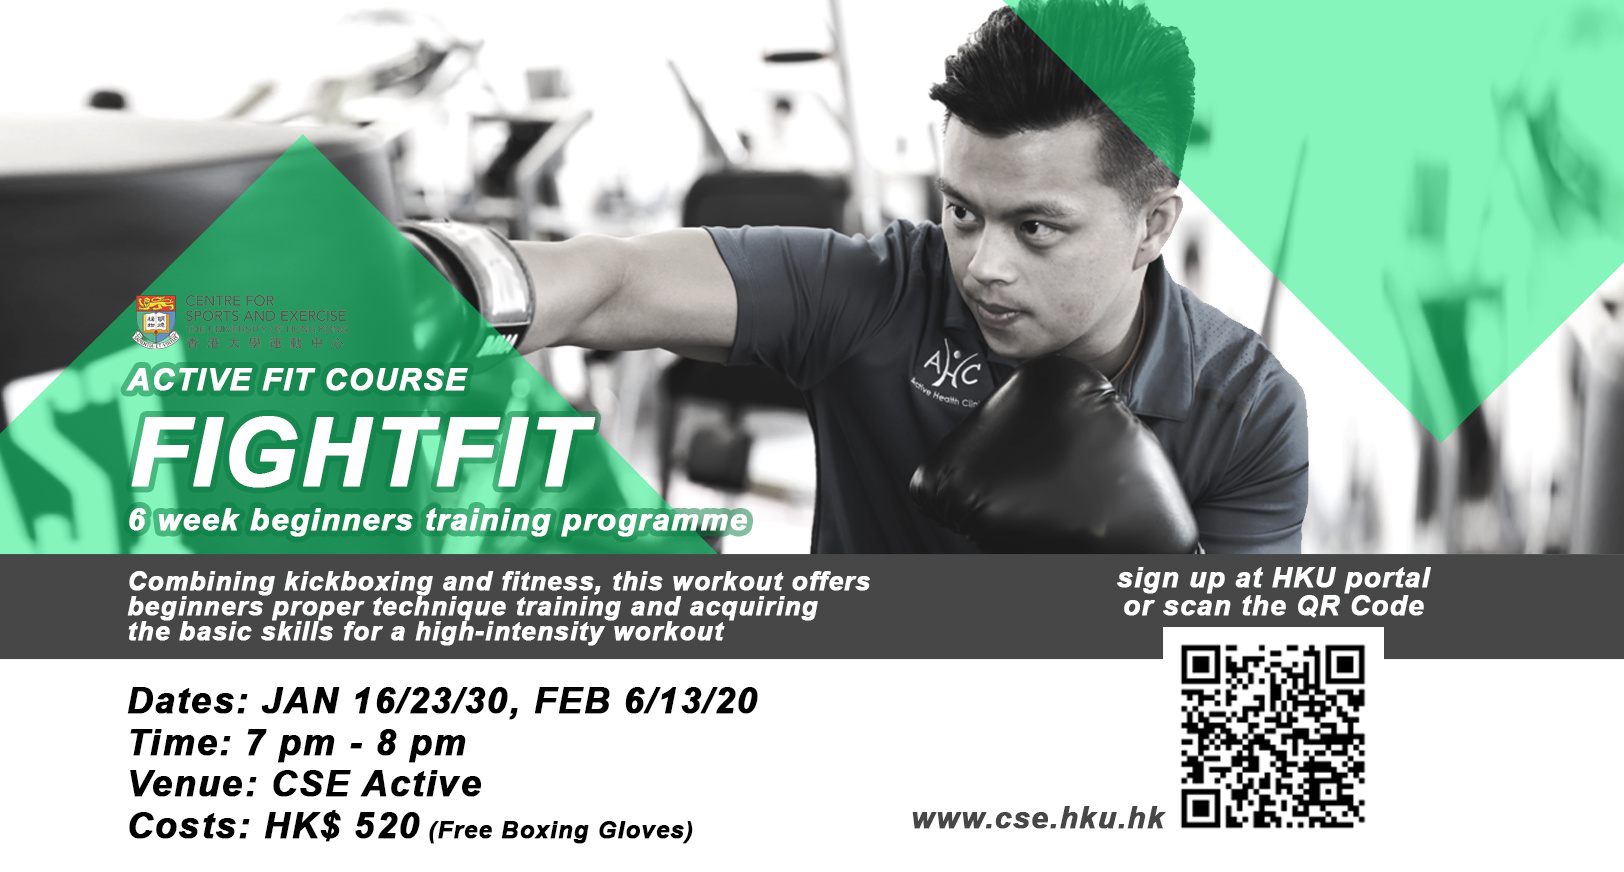 Active Fit Training Course - Fightfit (Beginners)